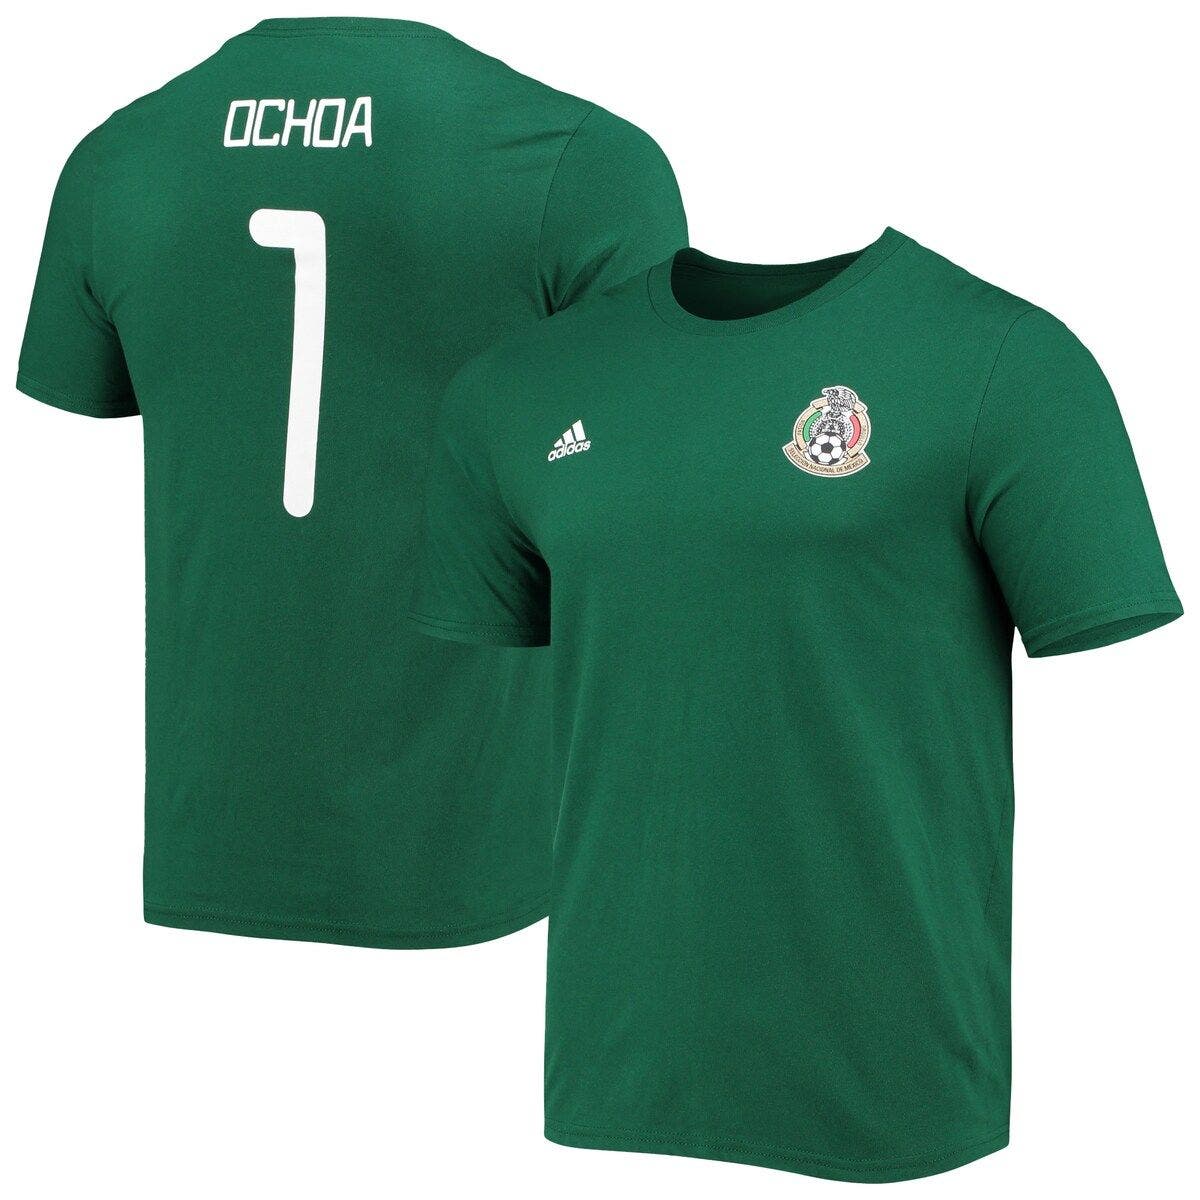 Mexico Women Fan Jersey White Exclusive Design_V Neck _Made in Mexico. 